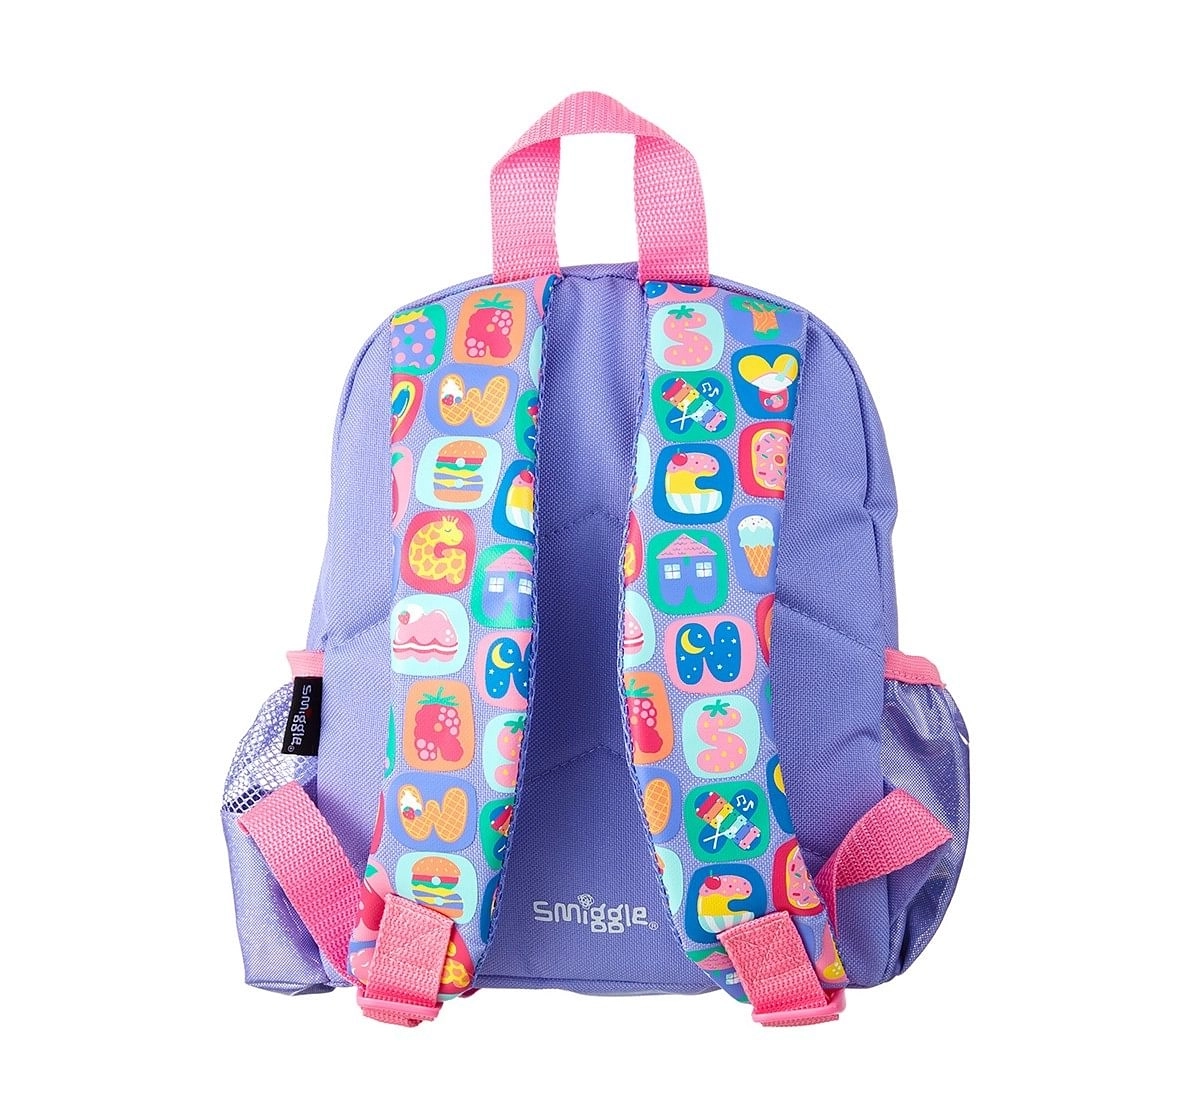 Smiggle Topsy Teeny Tiny Backpack - Alphabet Print Bags for Kids age 3Y+ (Purple)